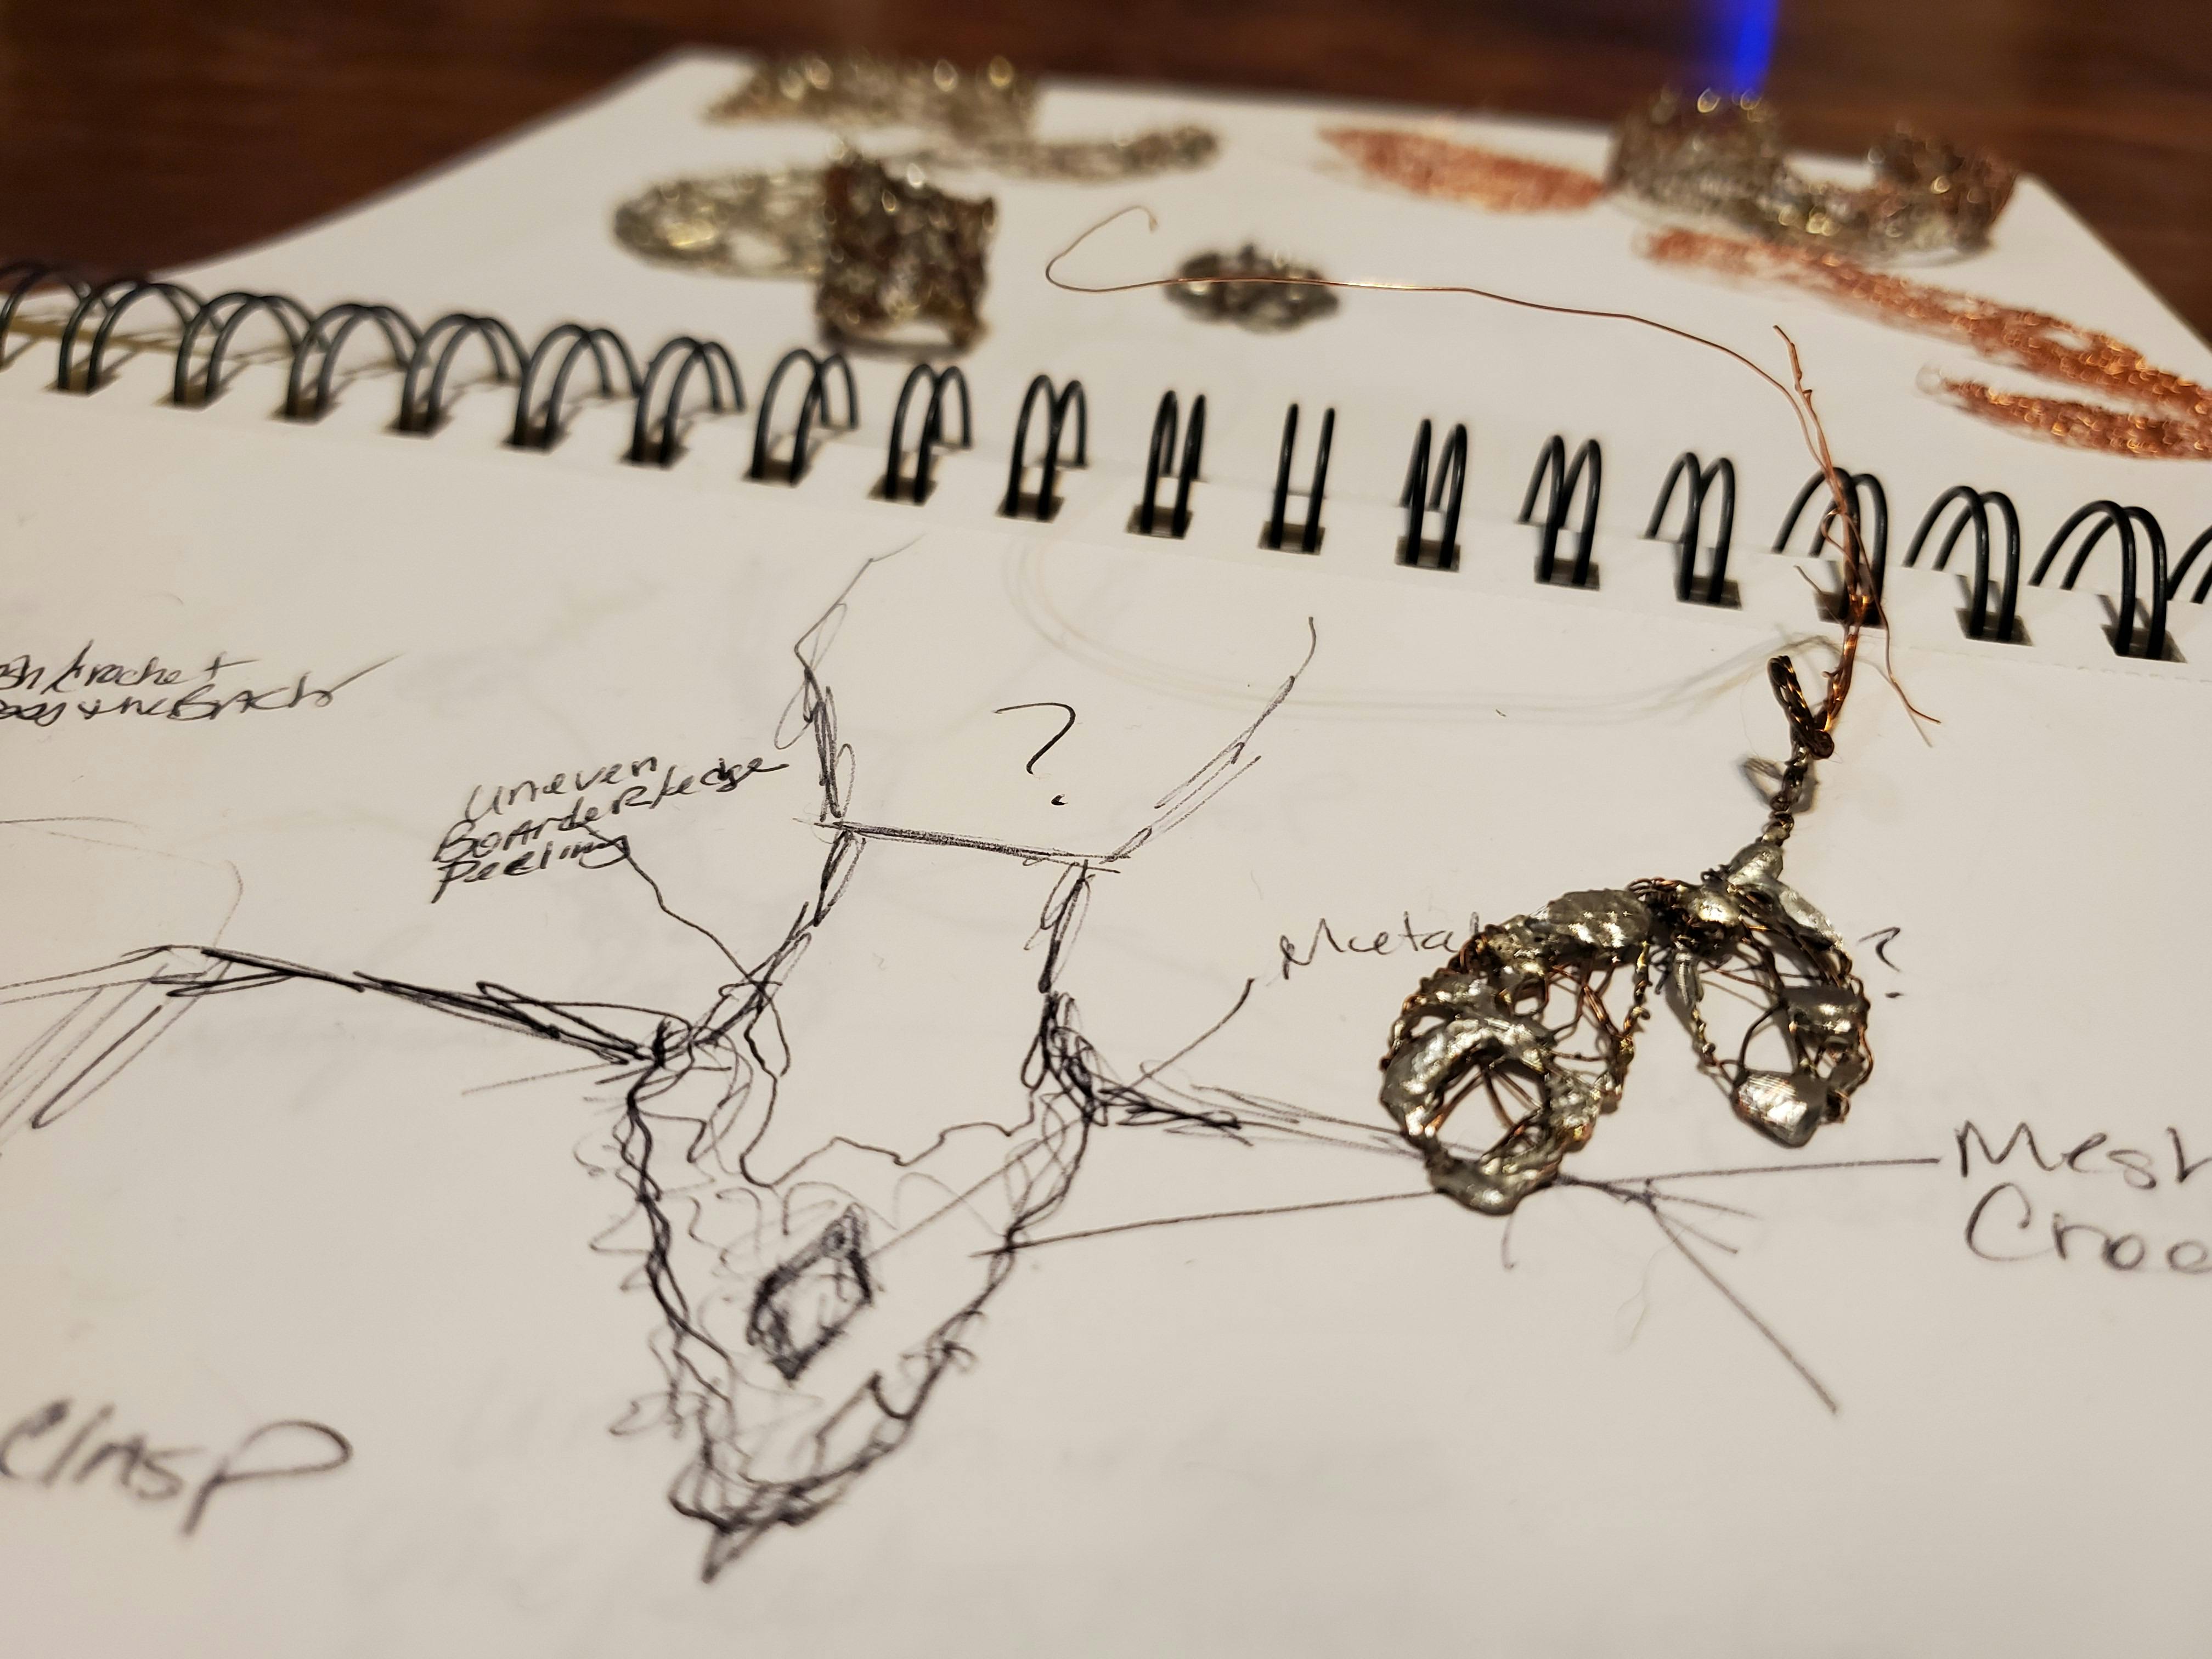 notepad with sketch of jewelry art concept